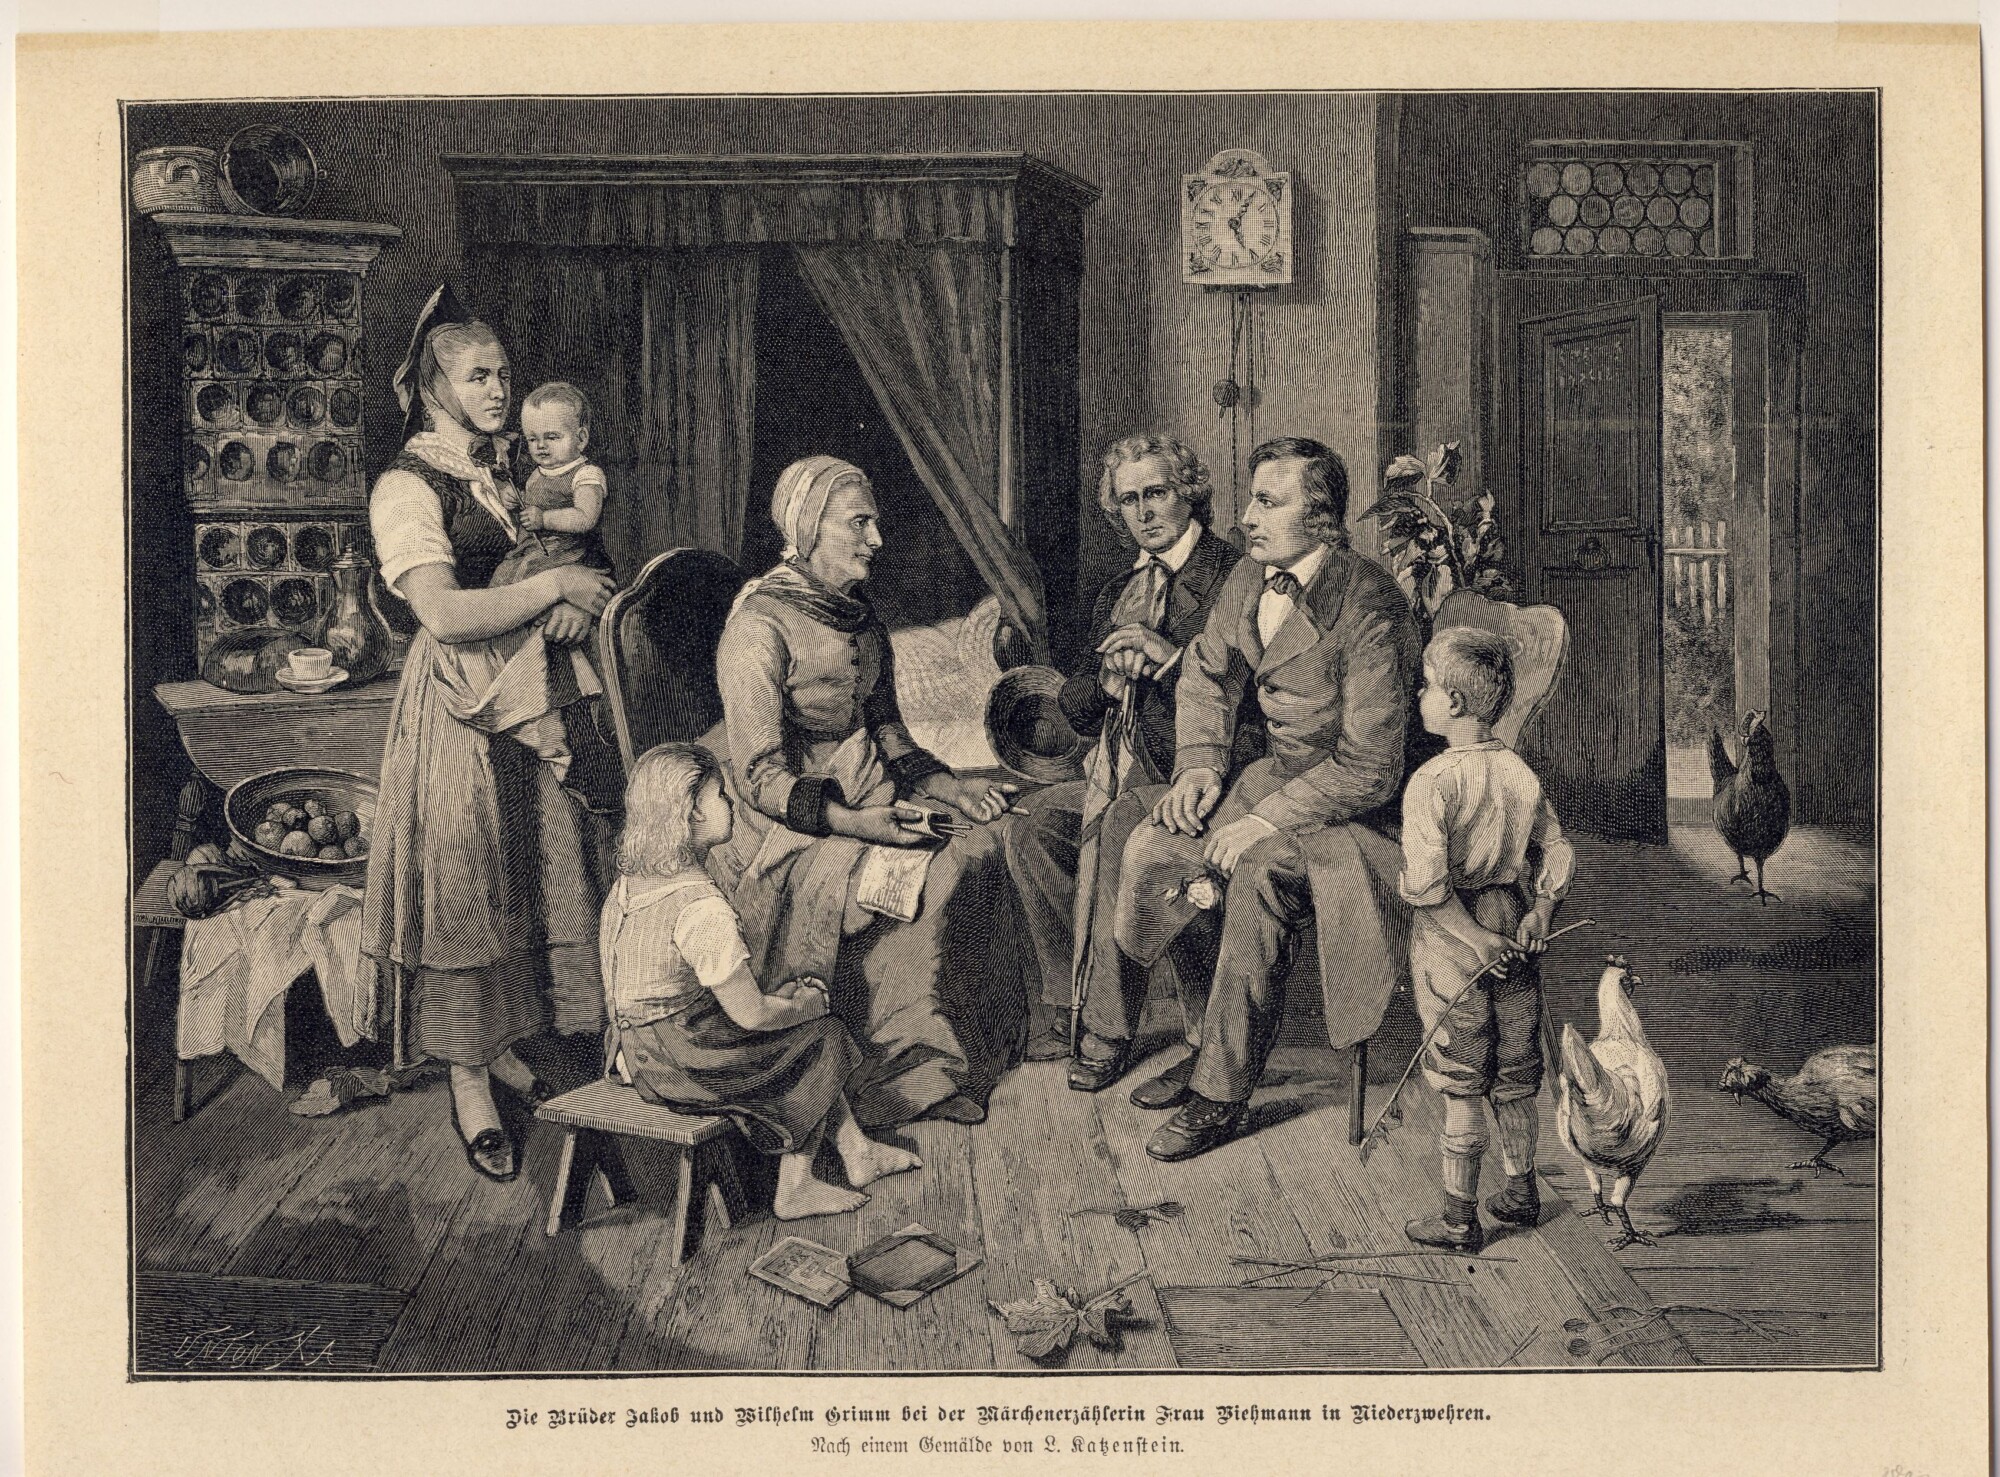 A gathering in European History: Dorothea Viehmann with the Brothers Grimm